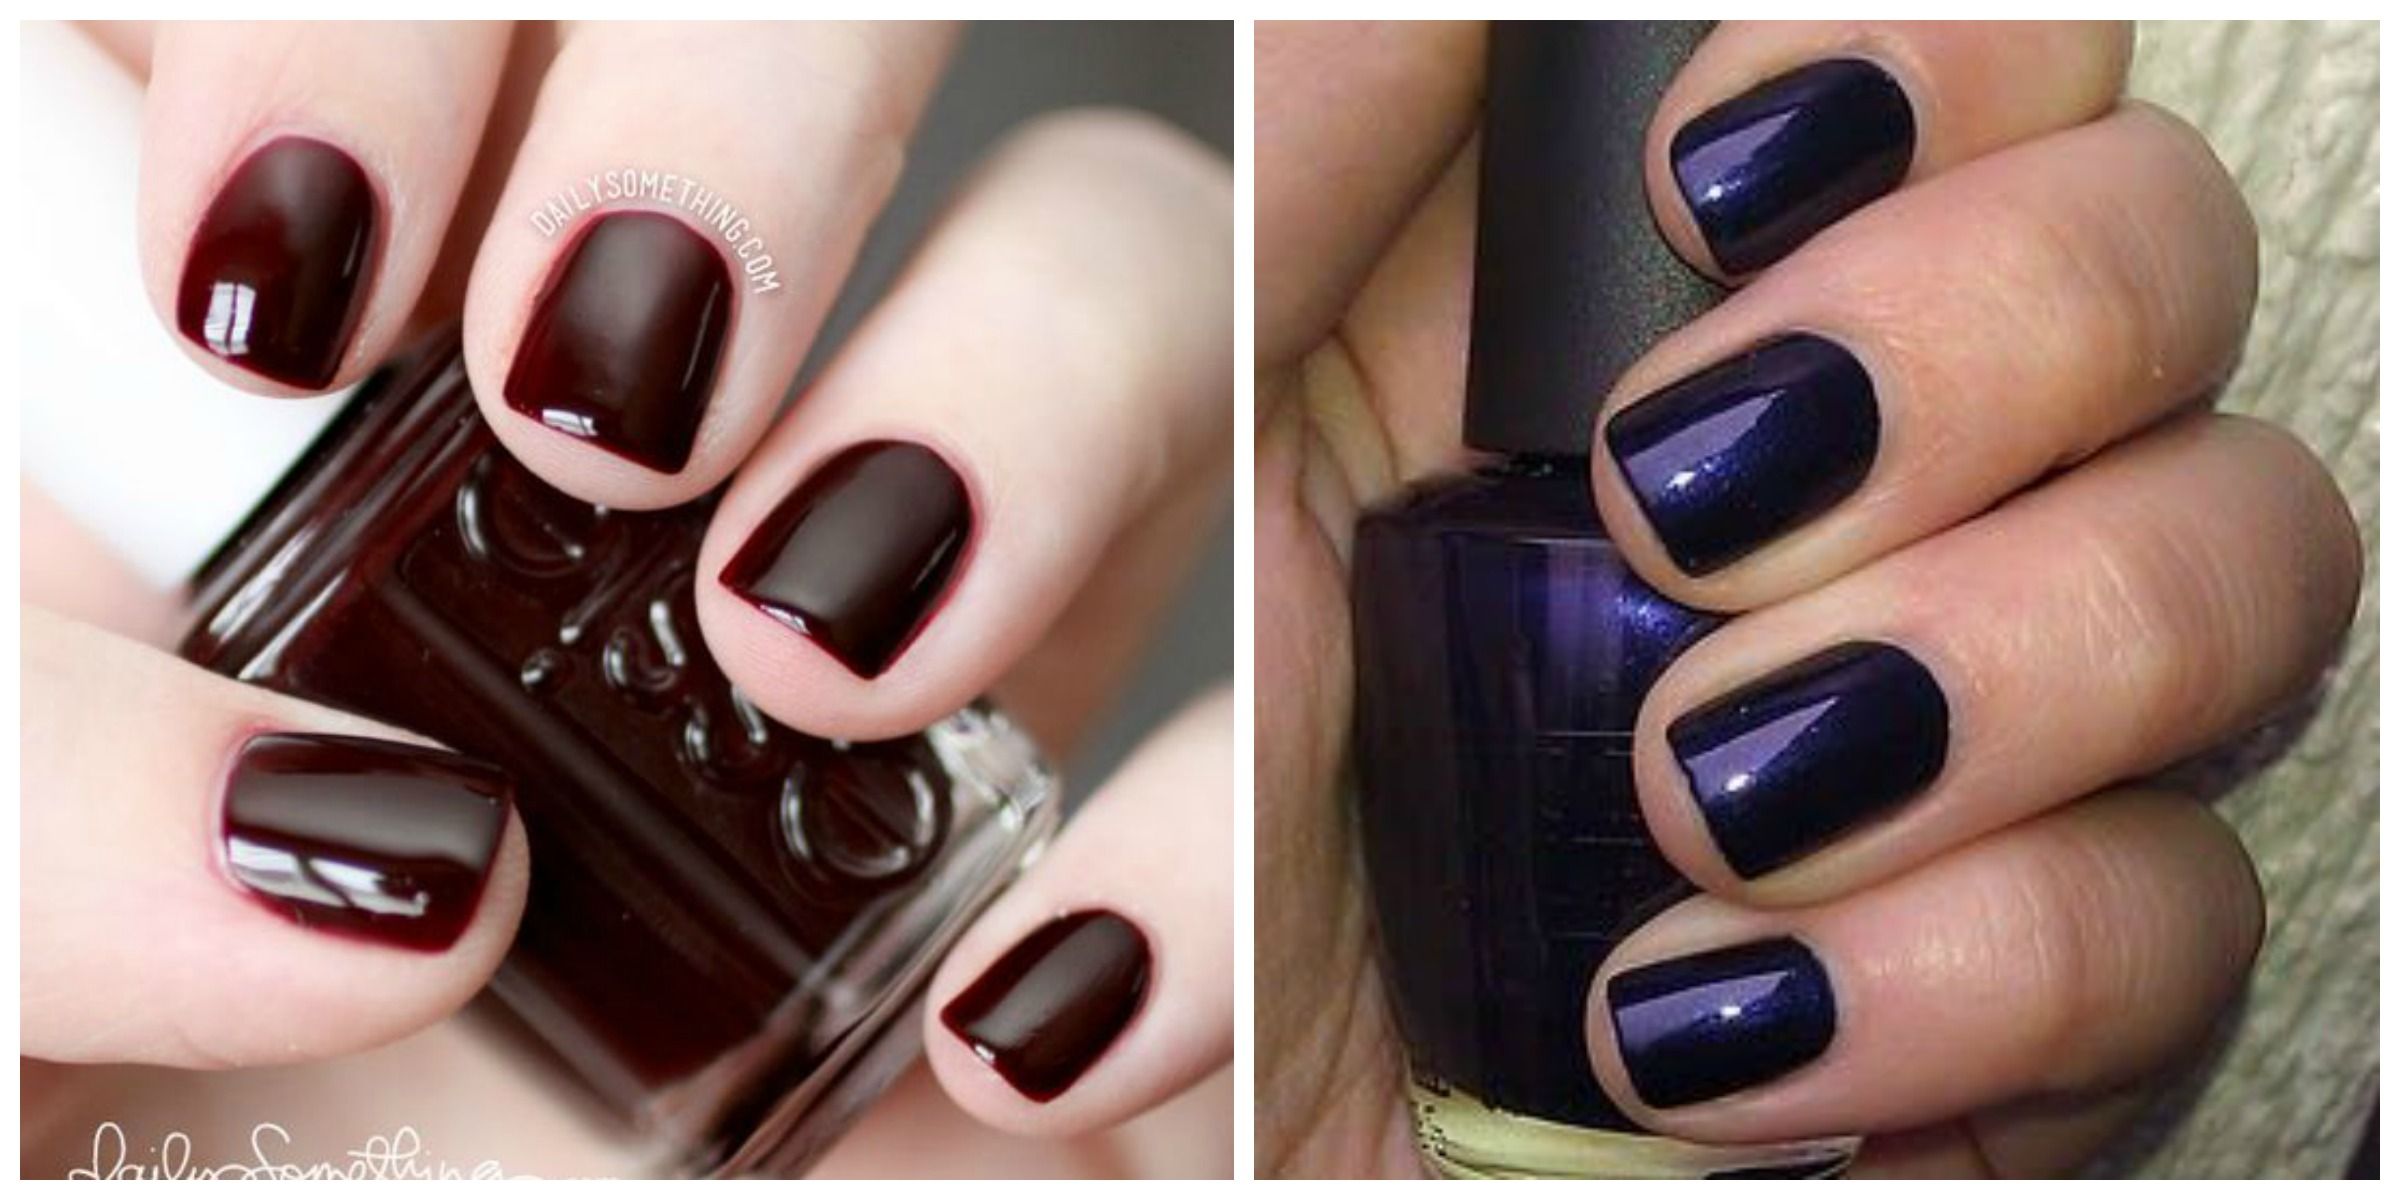 9. "Hottest Nail Polish Colors for the Season" - wide 6